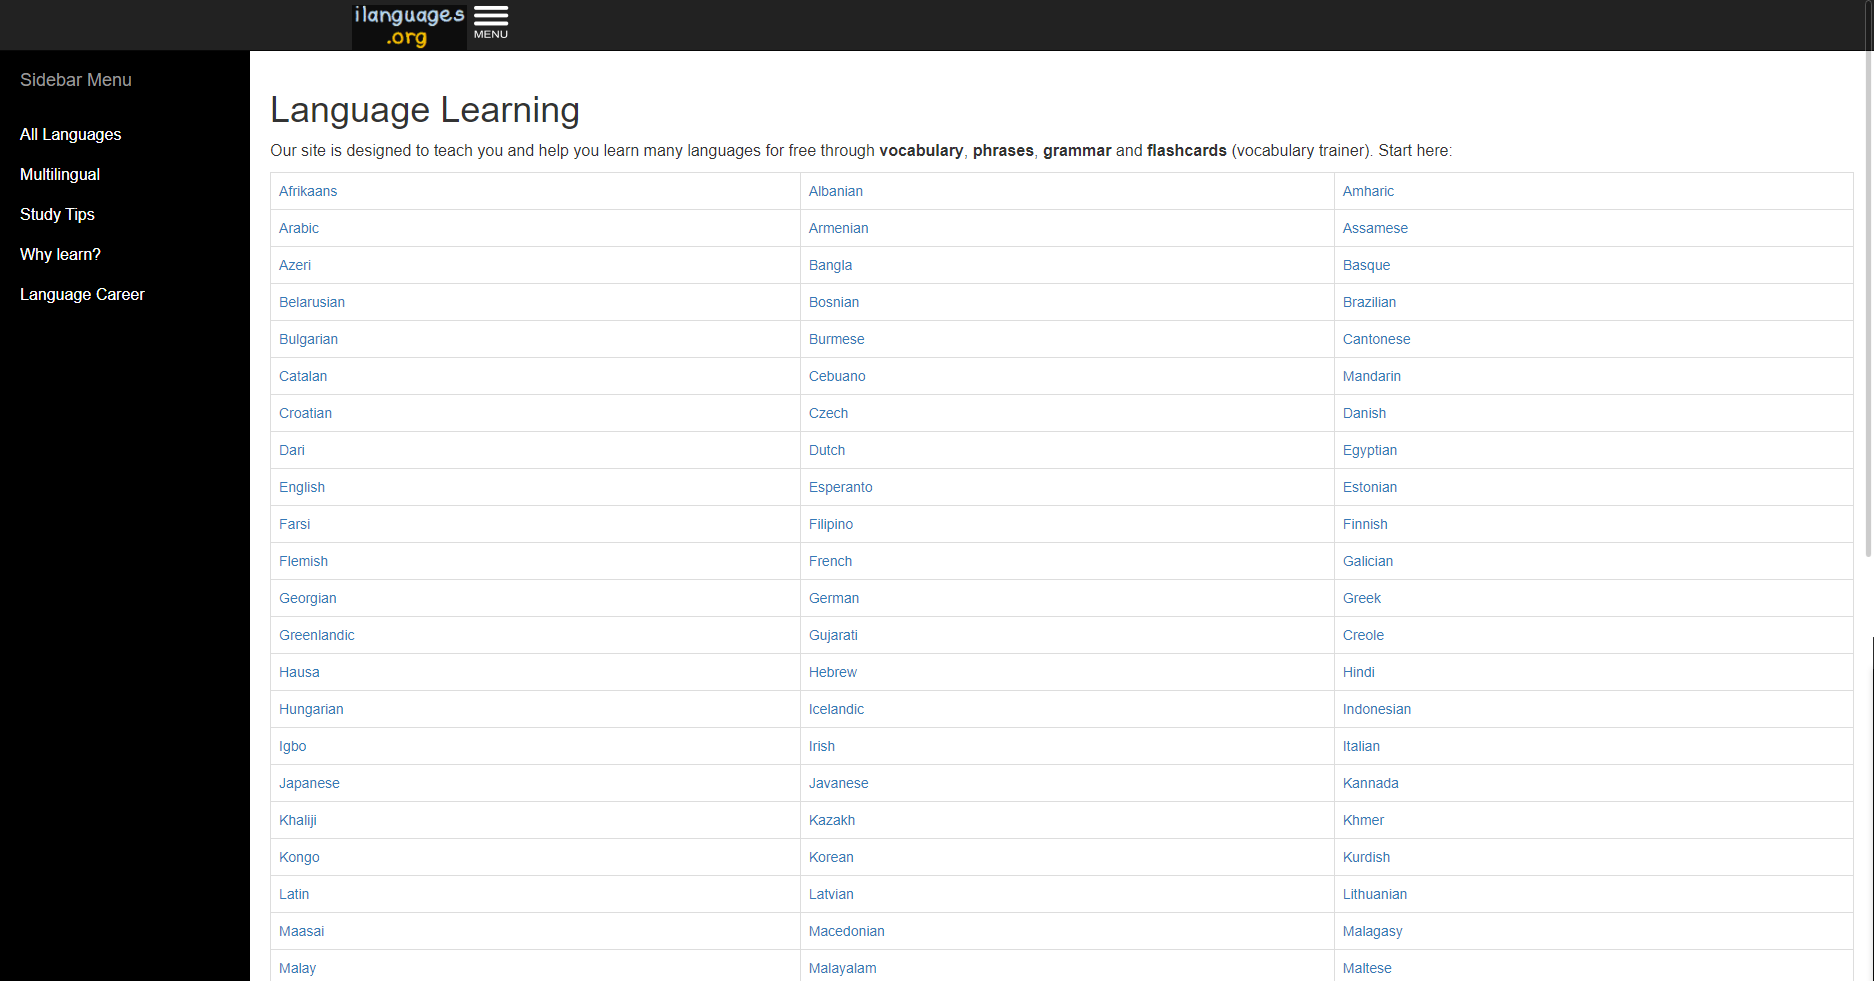 Preview image of ILANGUAGES.ORG